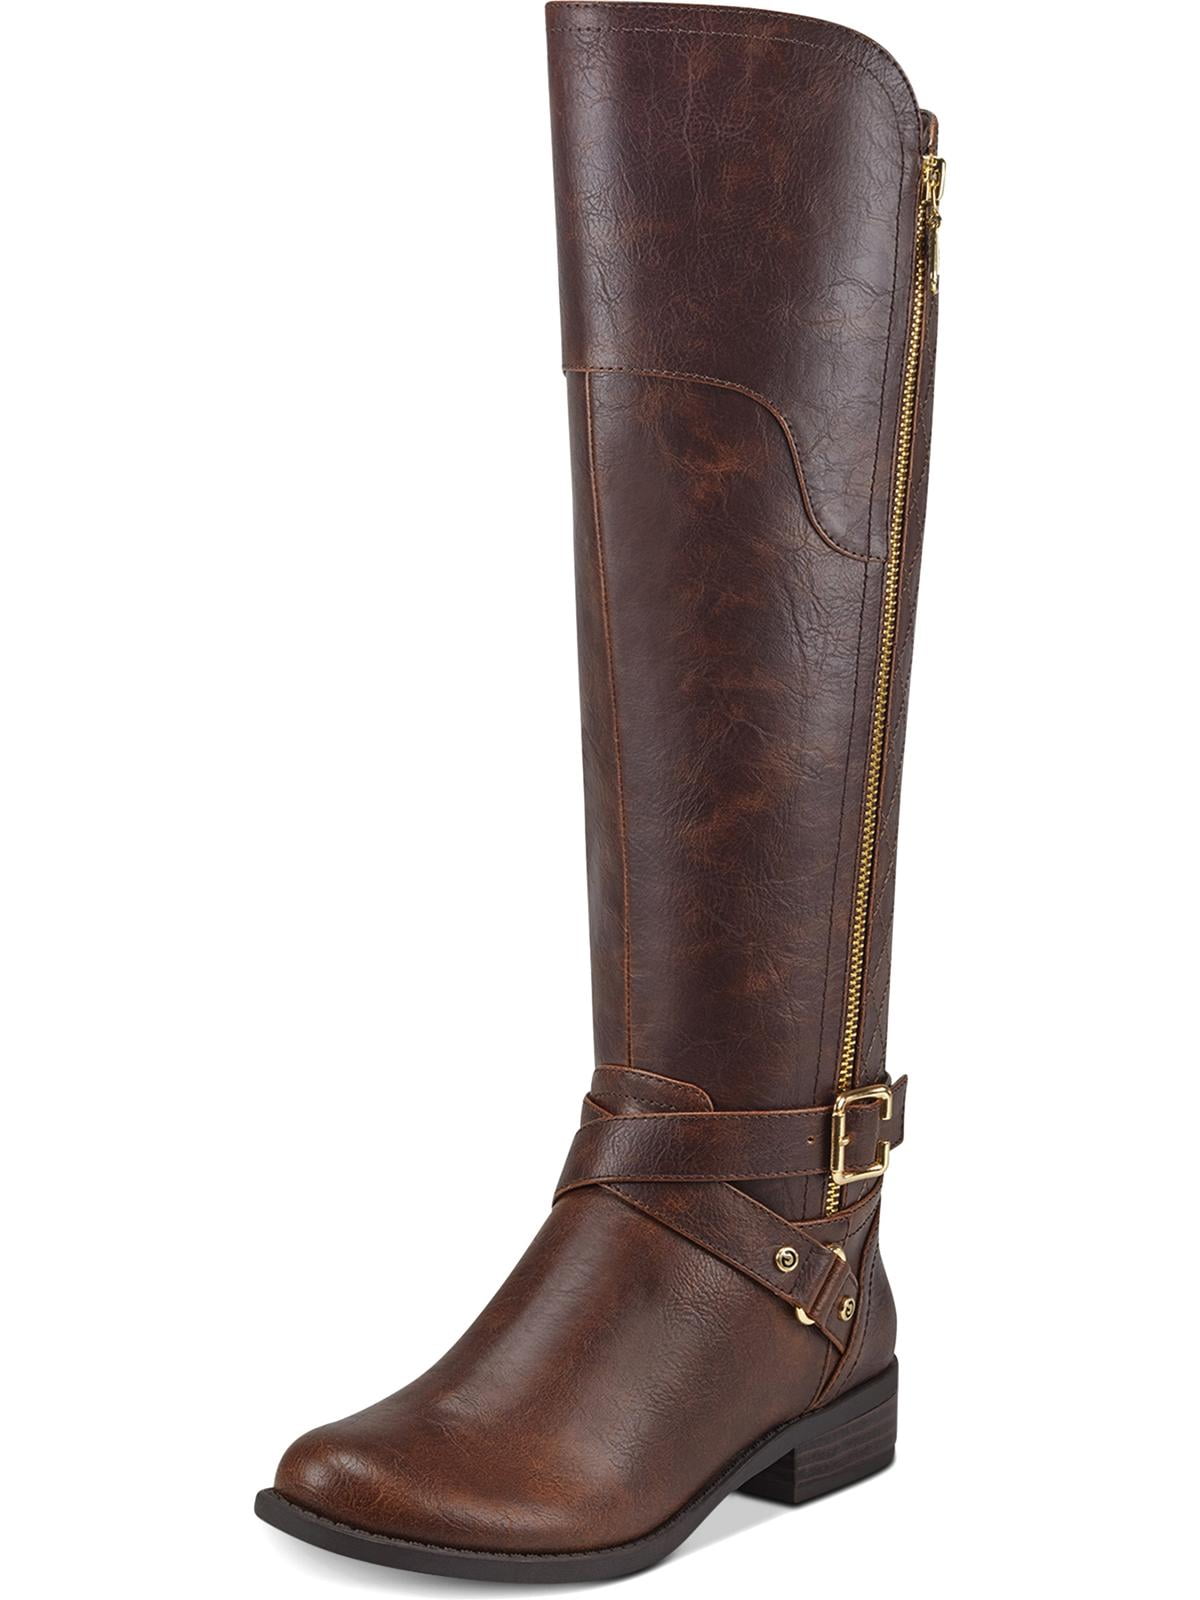 G BY GUESS - G by Guess Womens Haydin Faux Leather Tall Riding Boots ...